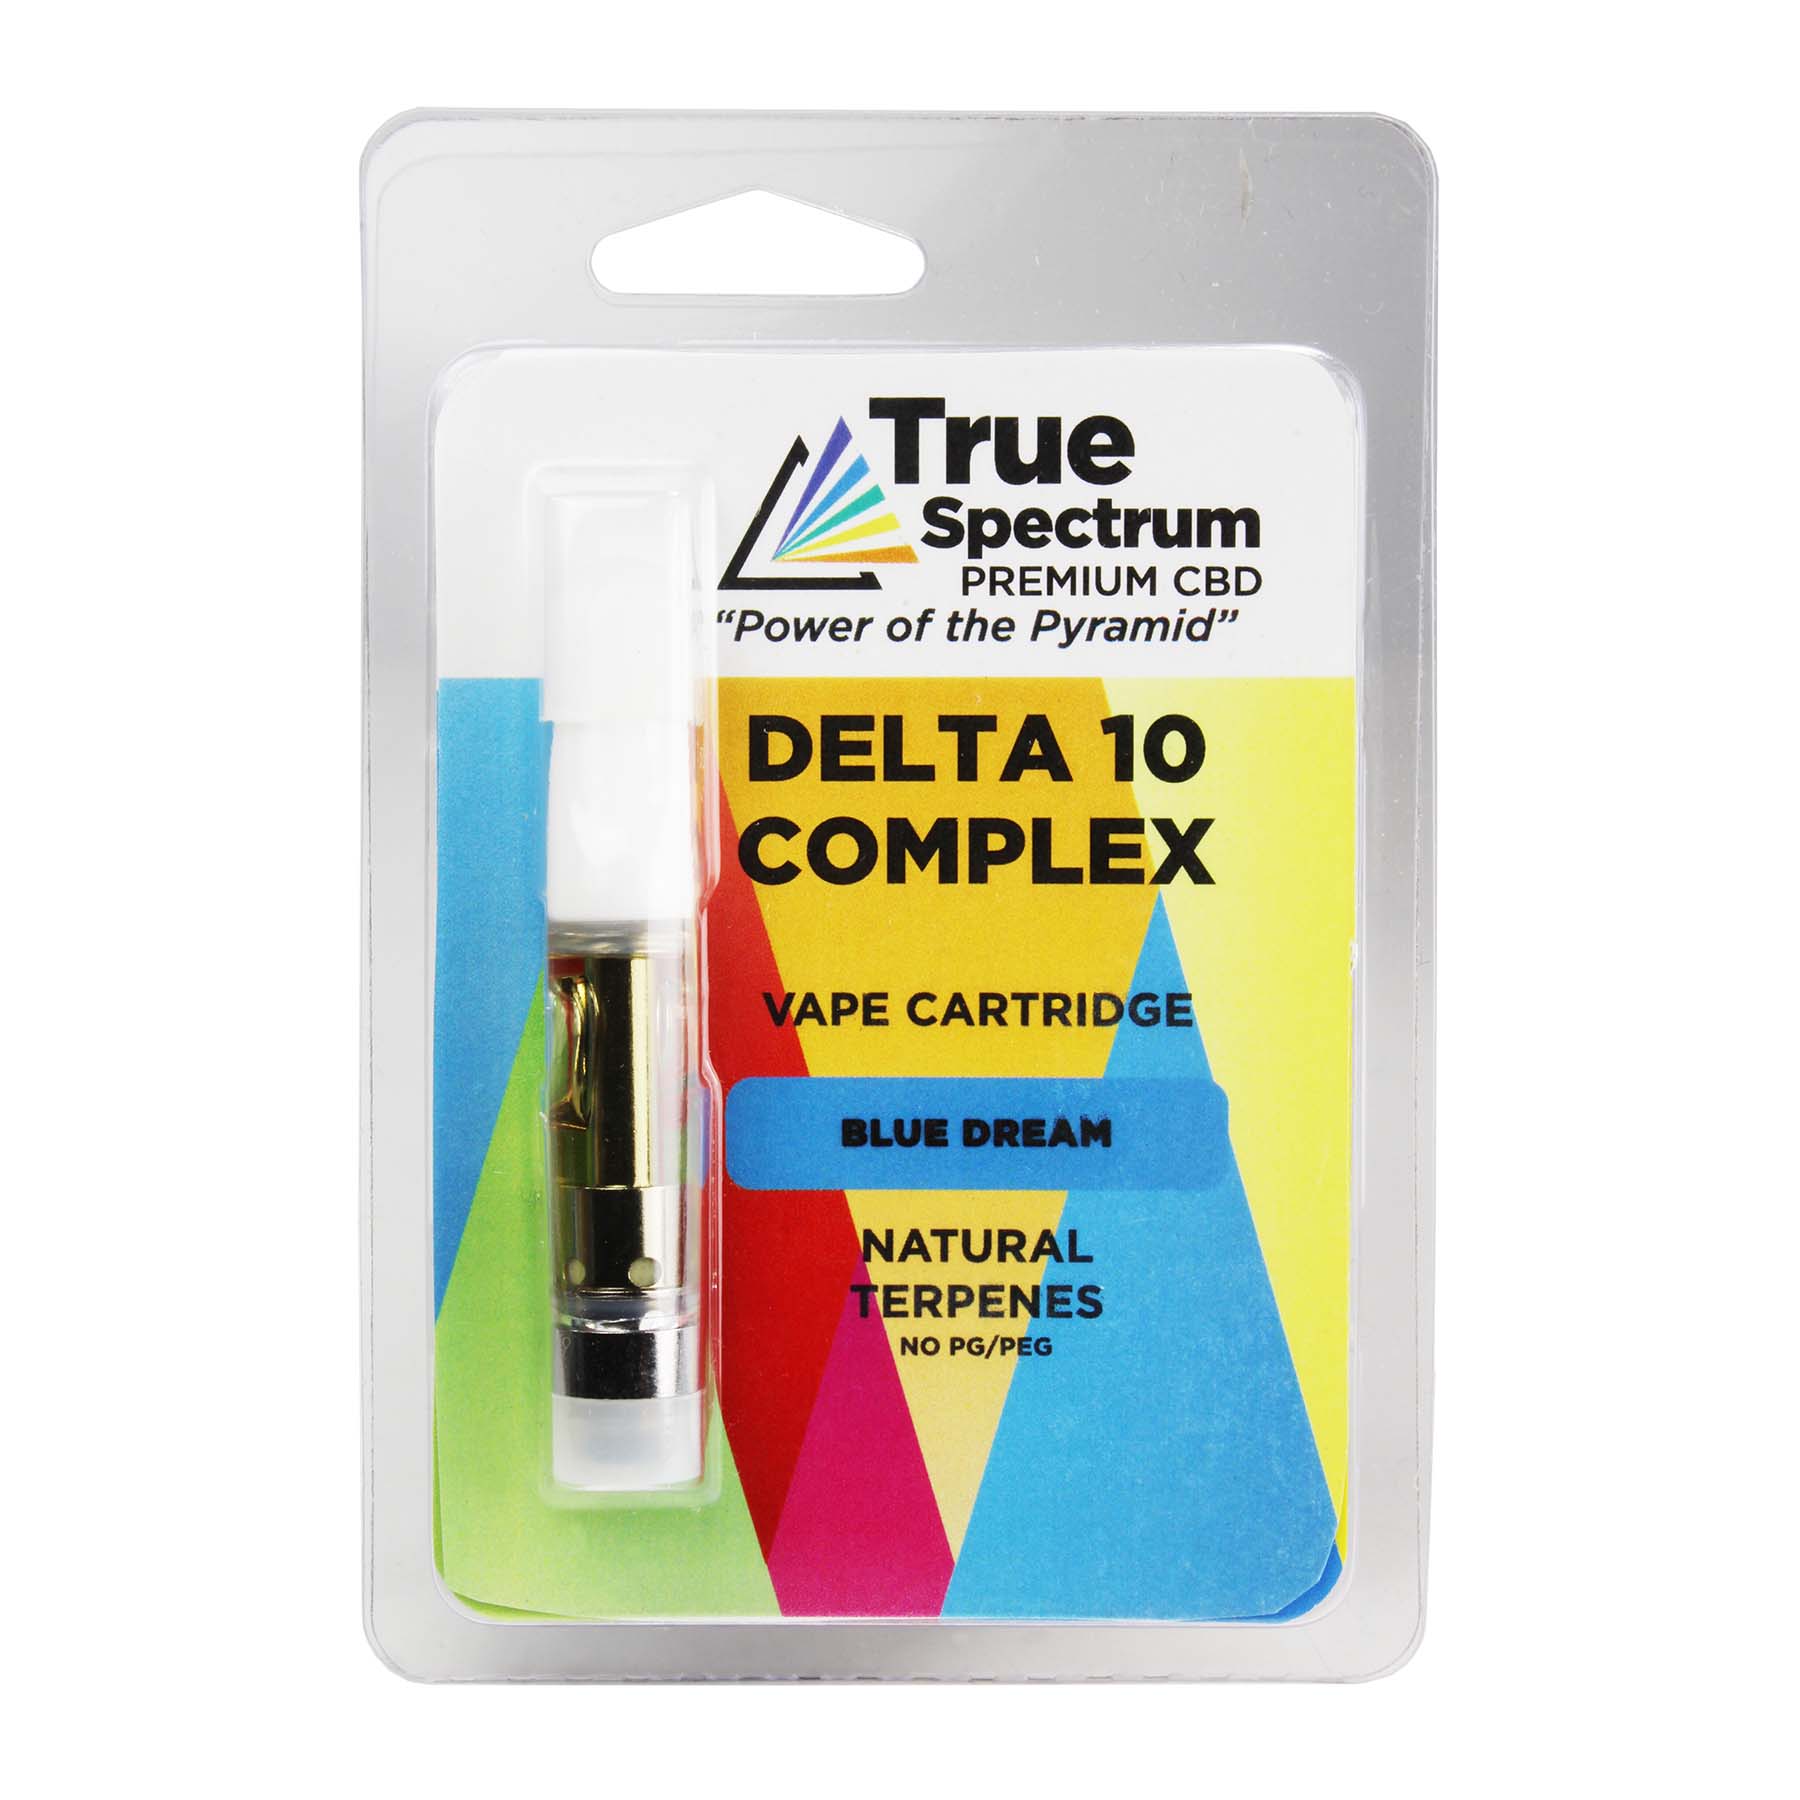 Delta 8 & 10 By My True Spectrum-Comprehensive Evaluation of the Finest Delta 8 & 10 Products A Detailed Analysis